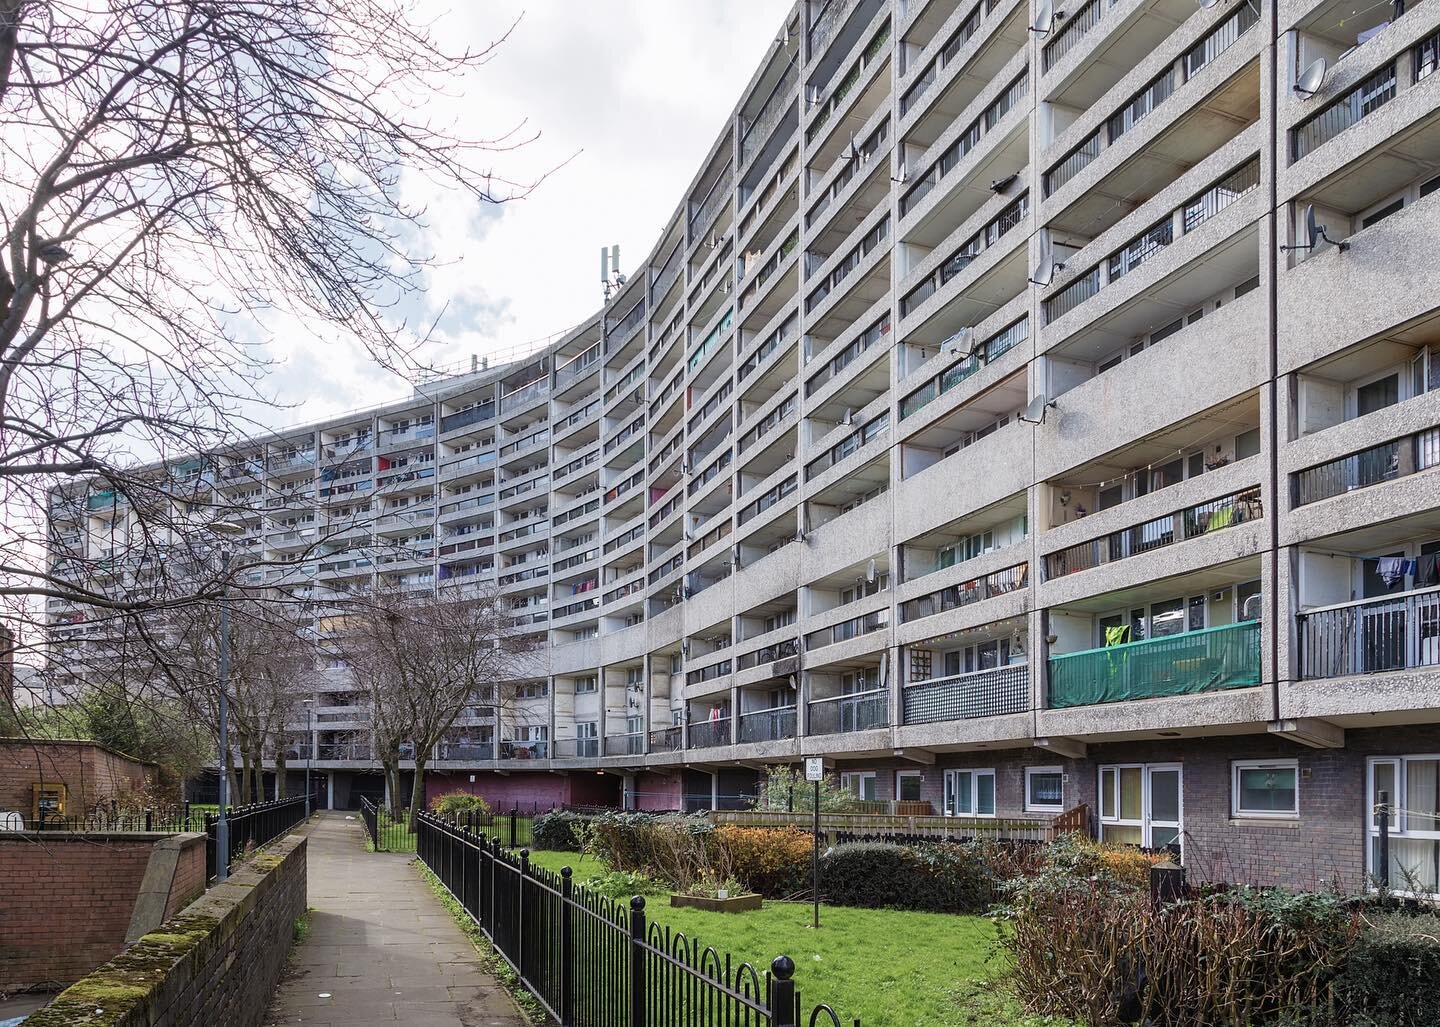 Cables Wynd House, best known as the Leith Banana Flats because of its curved shape is housing block which dominates the skyline of Leith, Edinburgh (2023).

The home of Sick Boy in the iconic Edinburgh-set novel Trainspotting, and were known as hotb